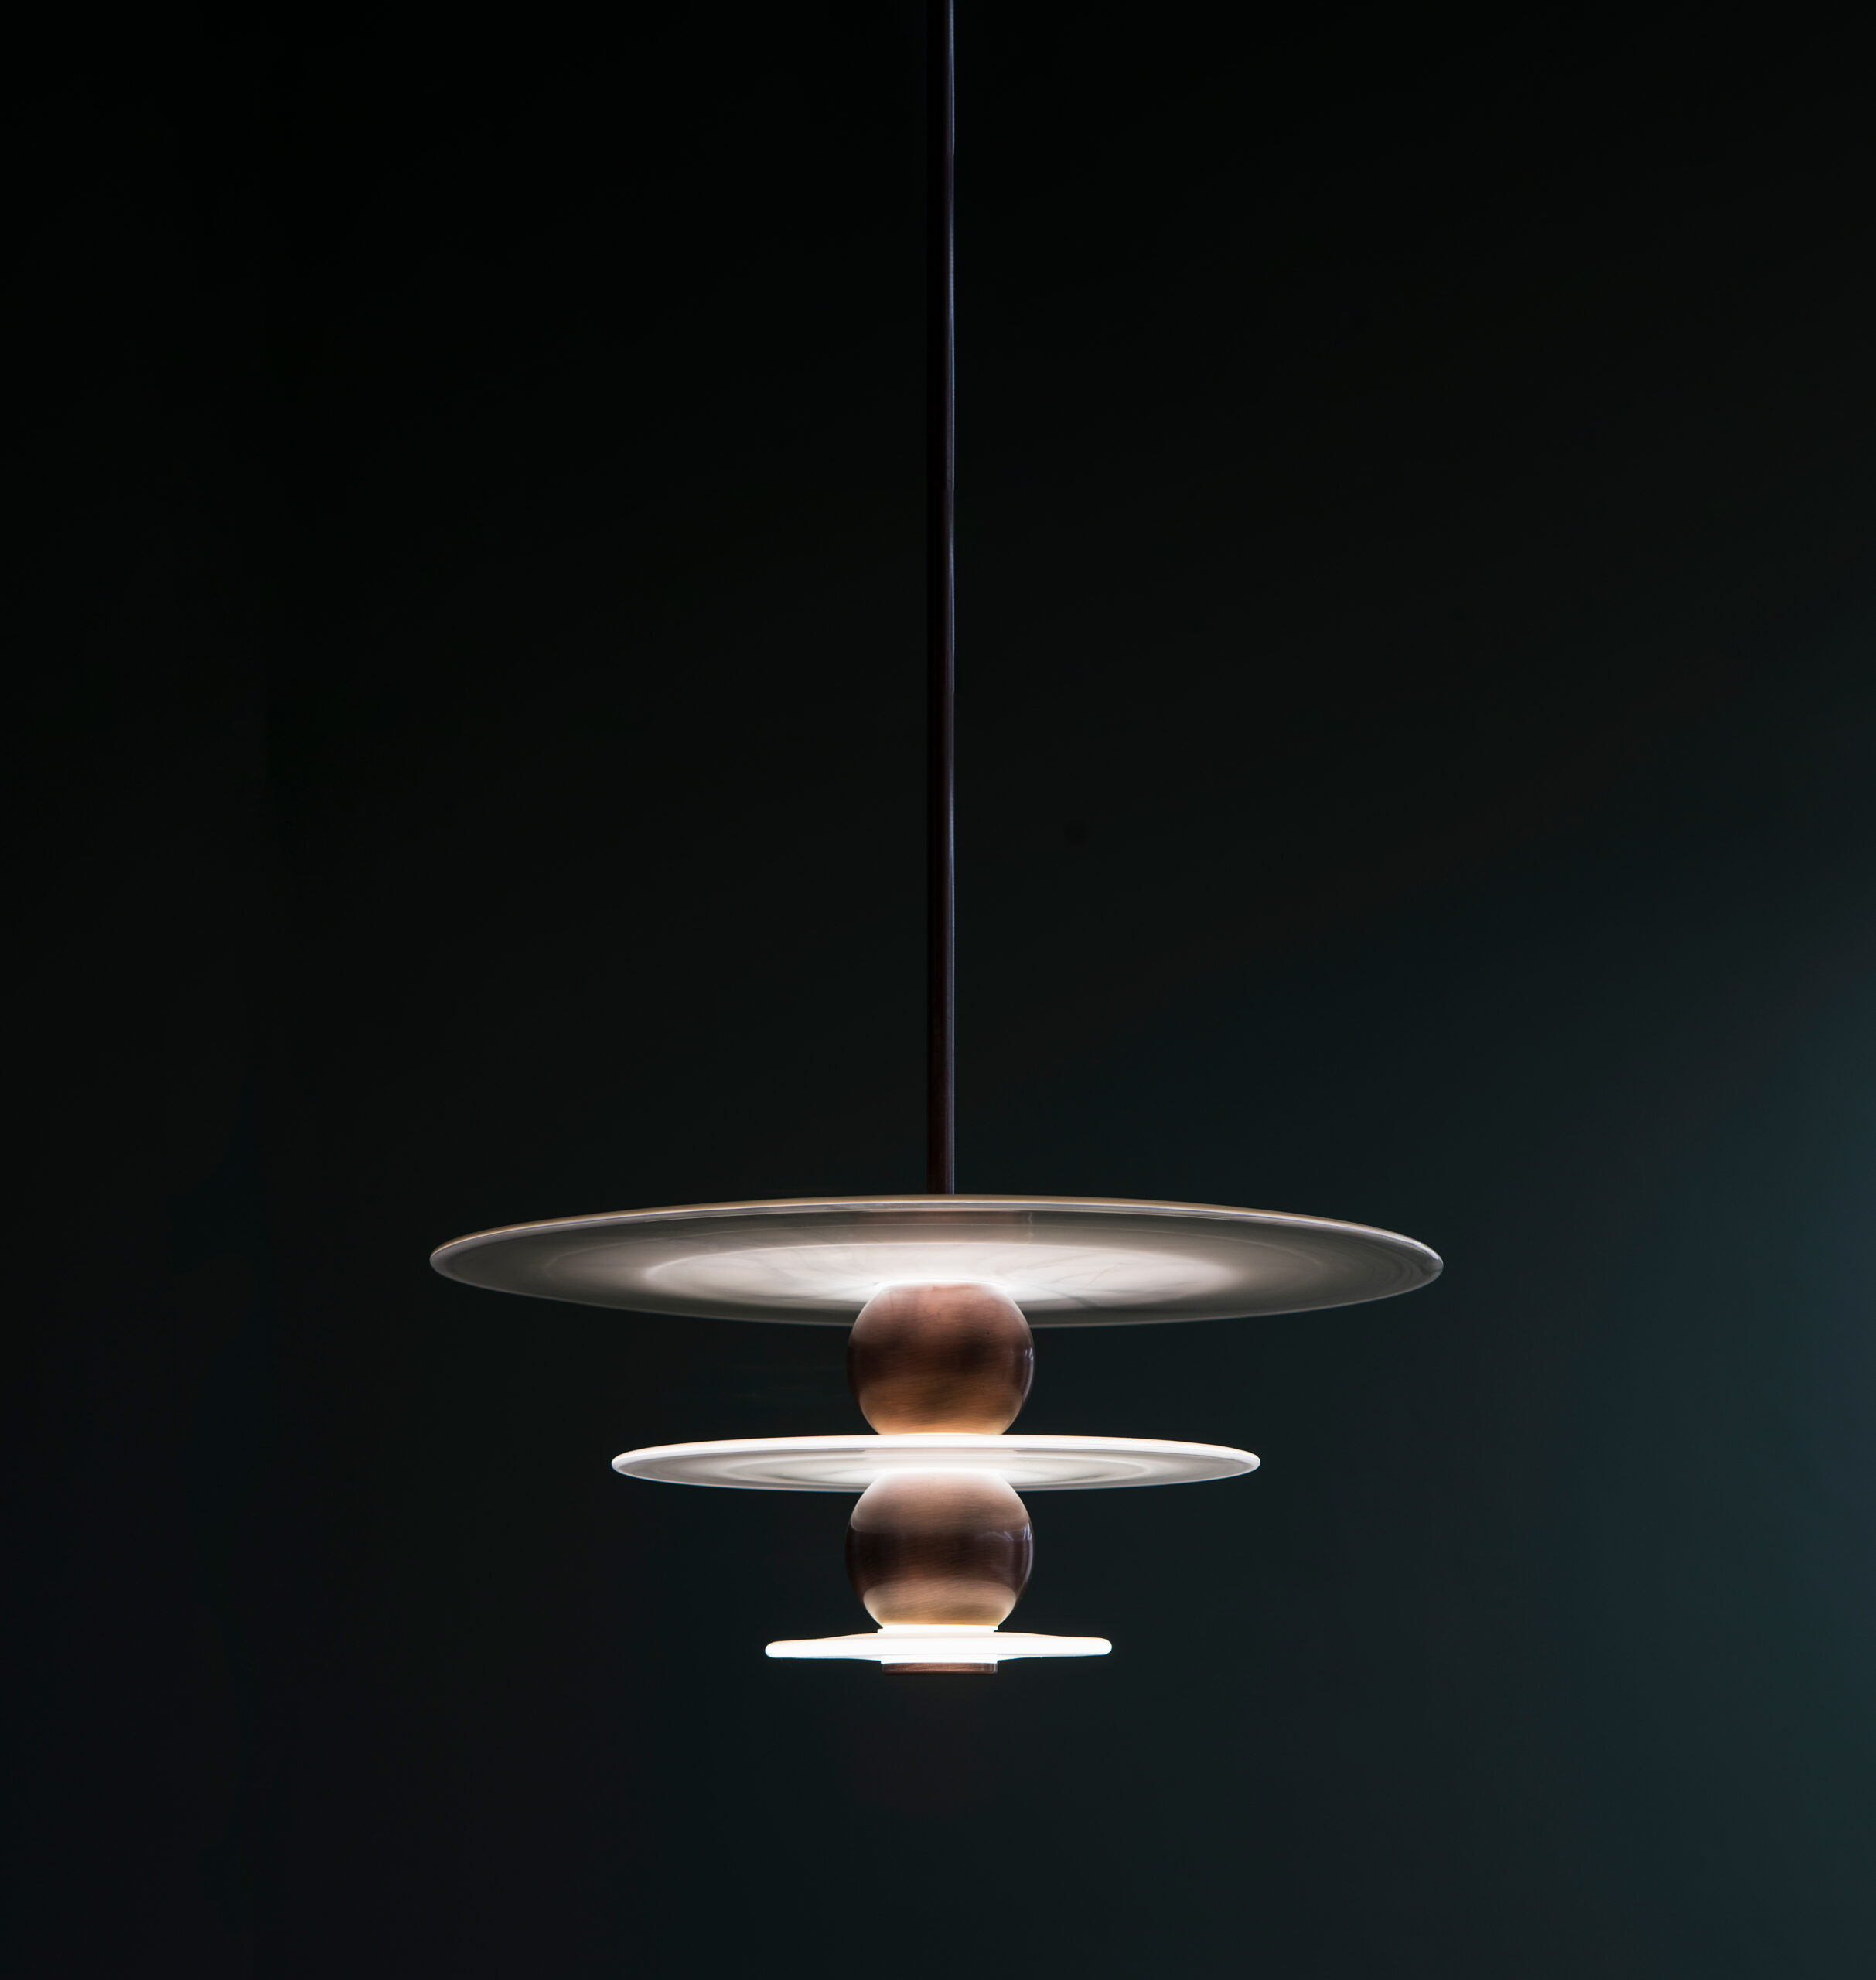 Sleek Stylish Pendant Light Three Tiered Ethereal Handmade Glass Discs Metal Orb Components Design Manufacture Nulty Bespoke